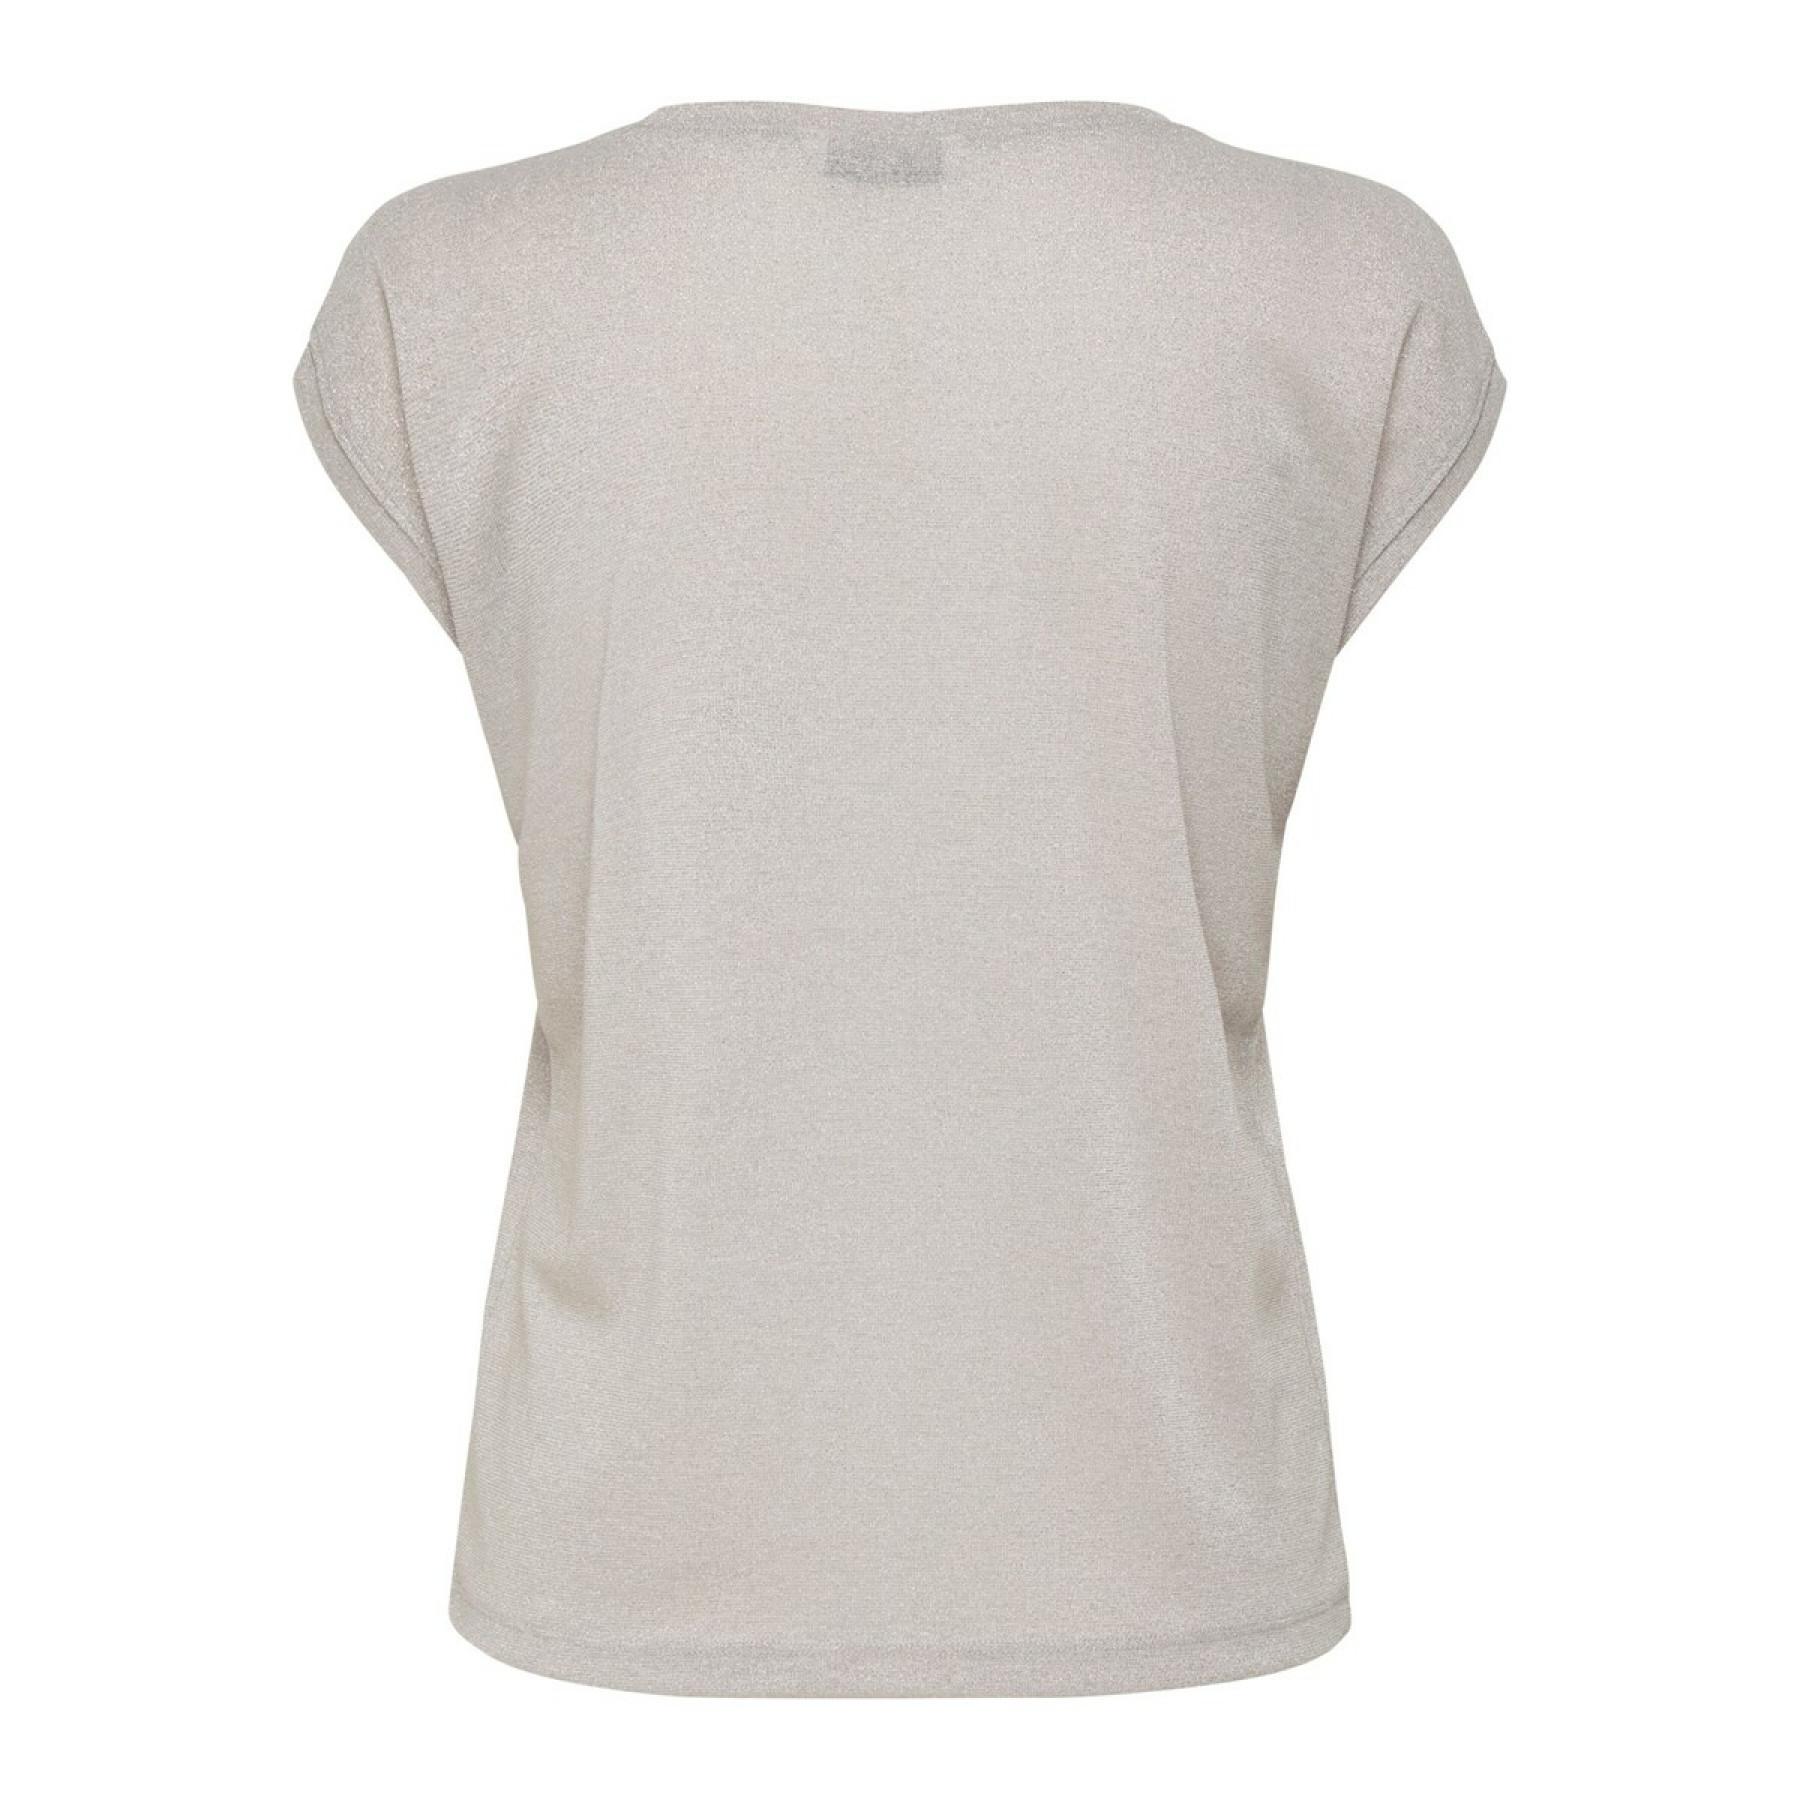 Women's T-shirt Only Silvery manches courtes col V lurex